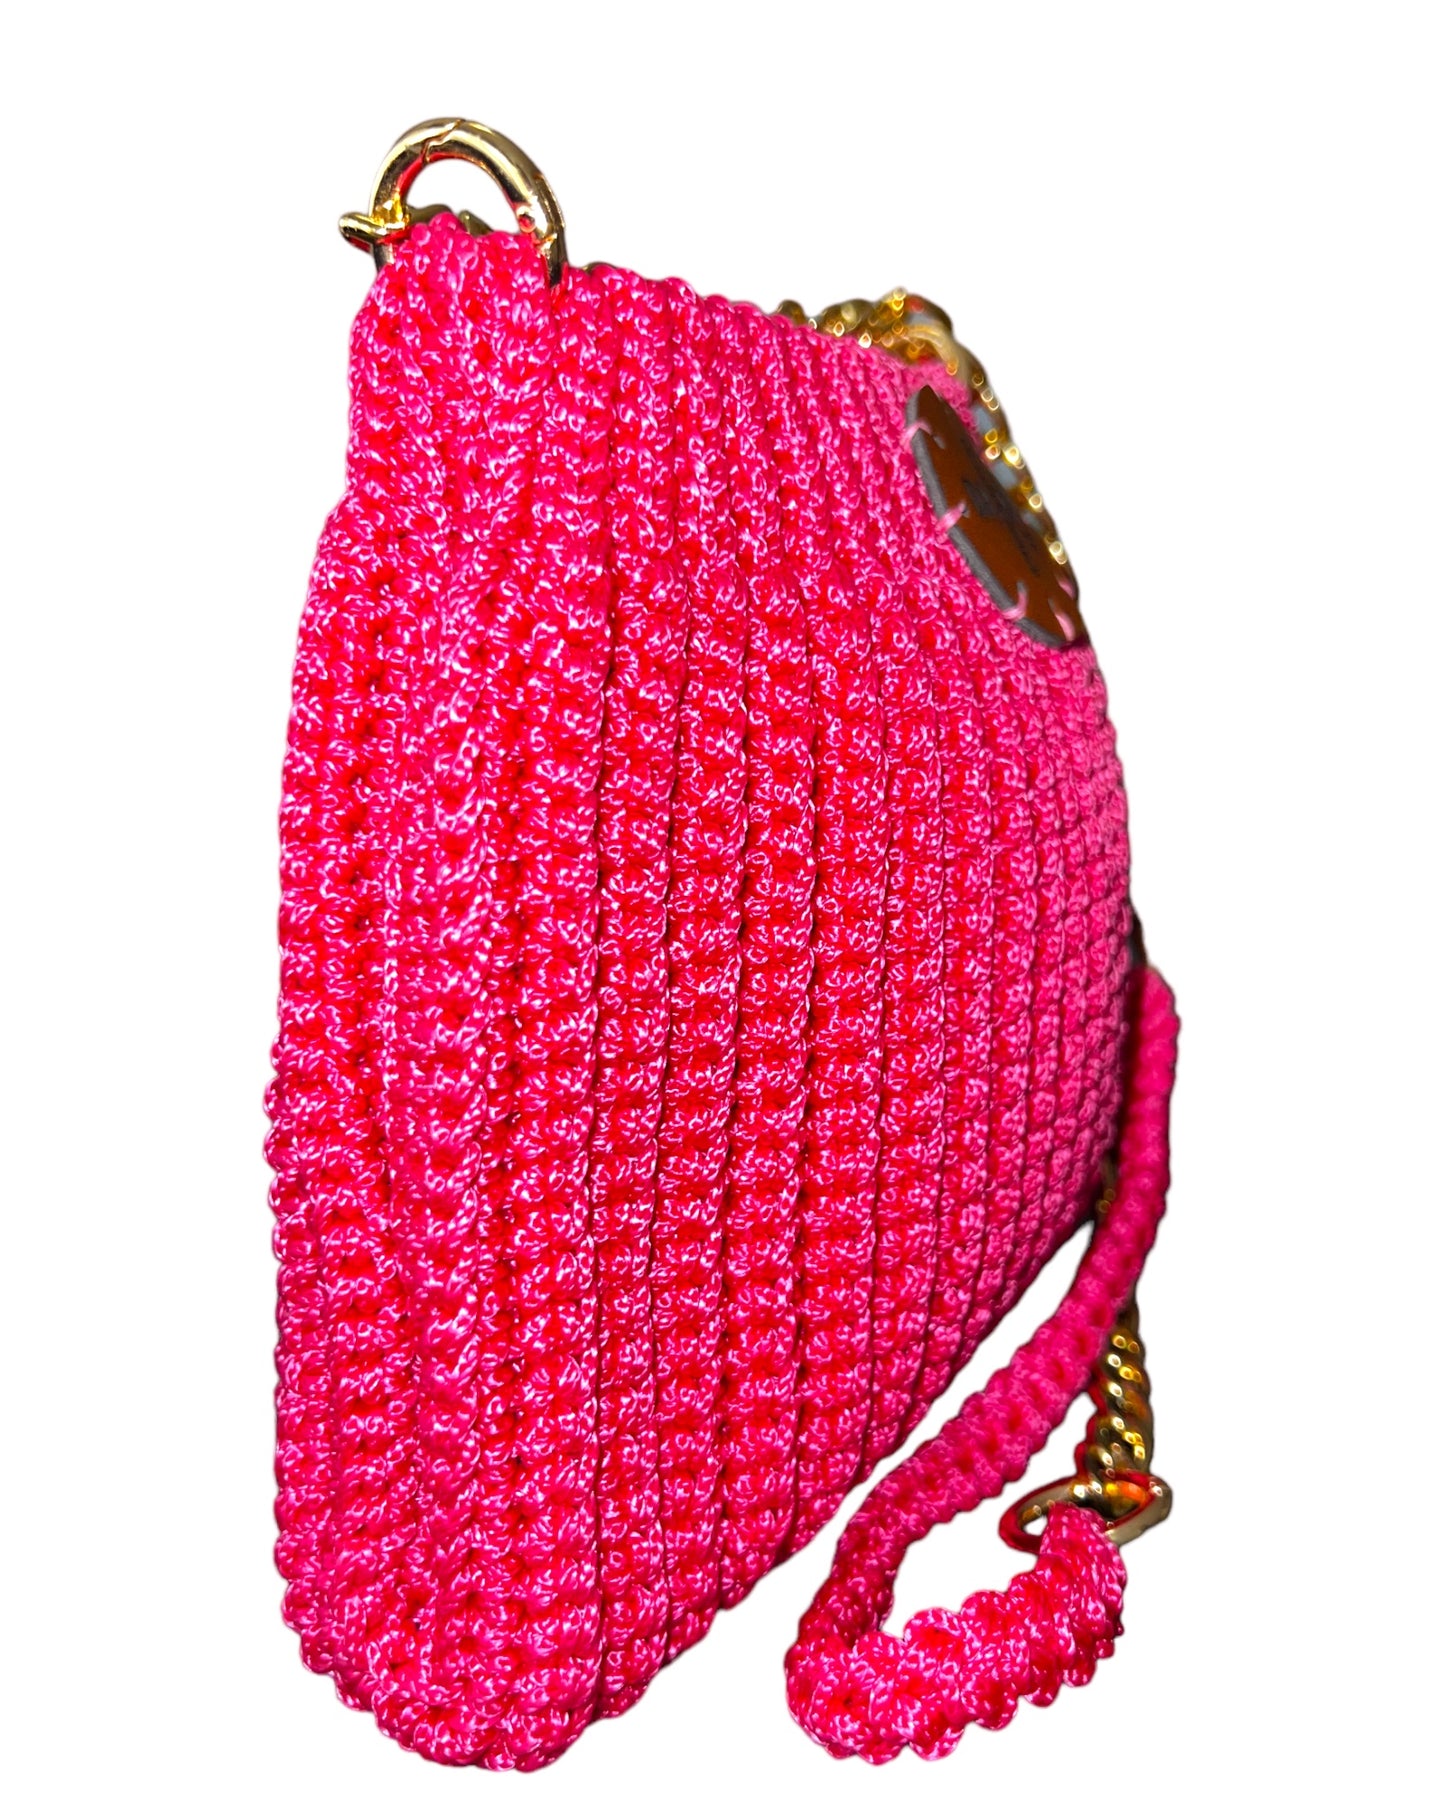 mini pouch-style embroidered crochet bag in a striking fuchsia color. The intricate embroidery adds artistic flair to the design, elevating it beyond a simple accessory. The golden metal chain provides a touch of chic versatility, allowing the bag to be worn effortlessly over the shoulder or crossbody. The upper part of the chain, crafted from the same fabric as the bag, ensures both elegance and comfort during wear.